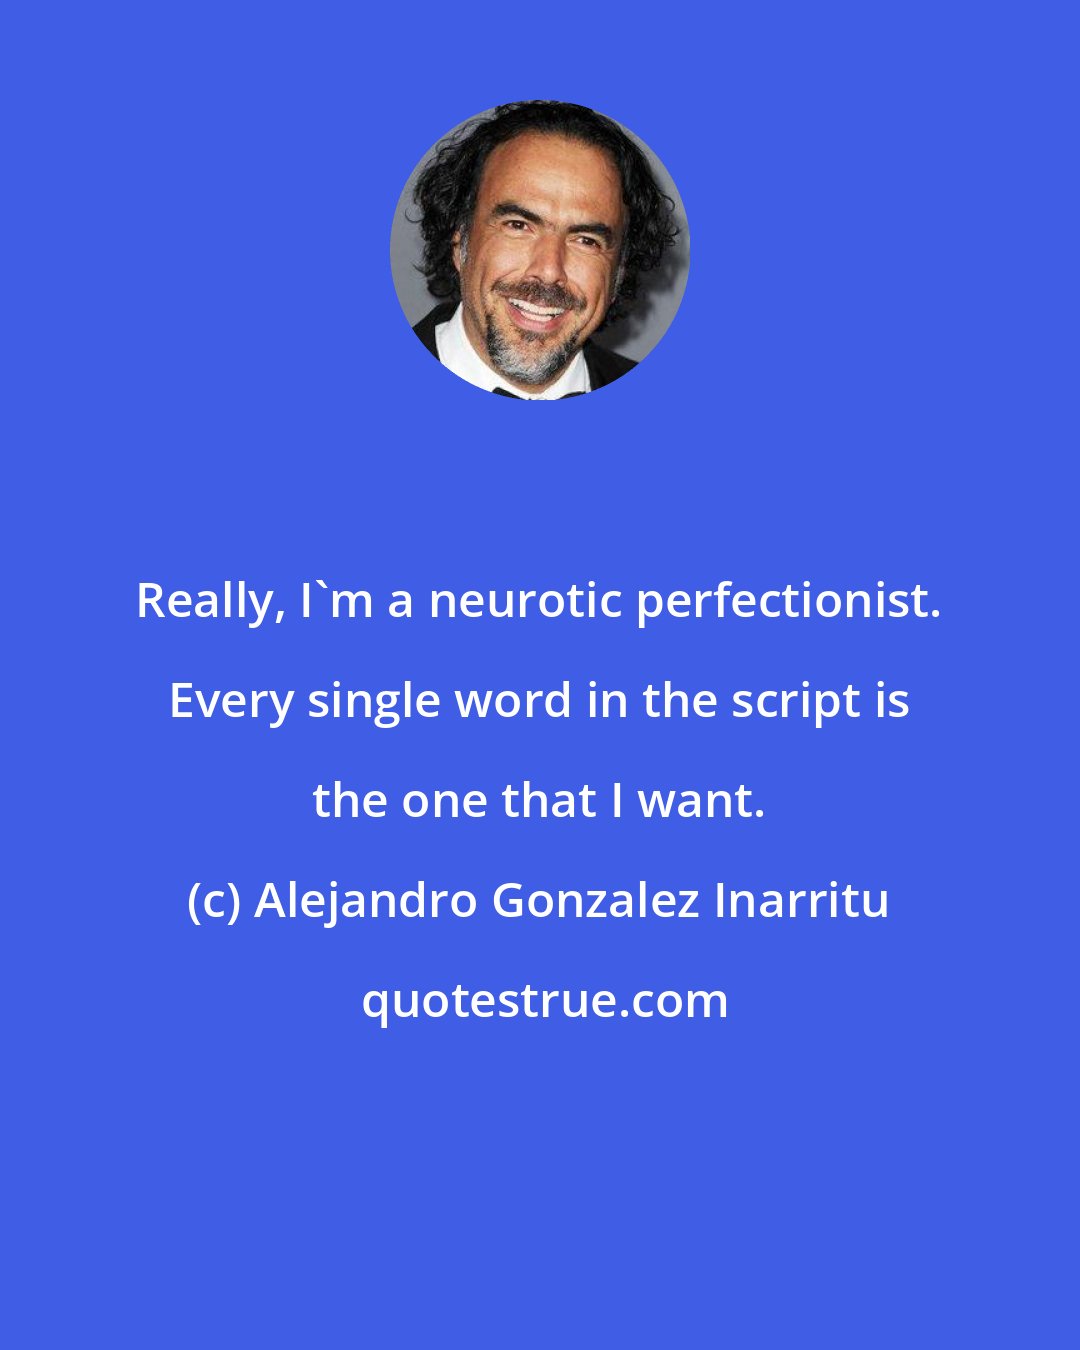 Alejandro Gonzalez Inarritu: Really, I'm a neurotic perfectionist. Every single word in the script is the one that I want.